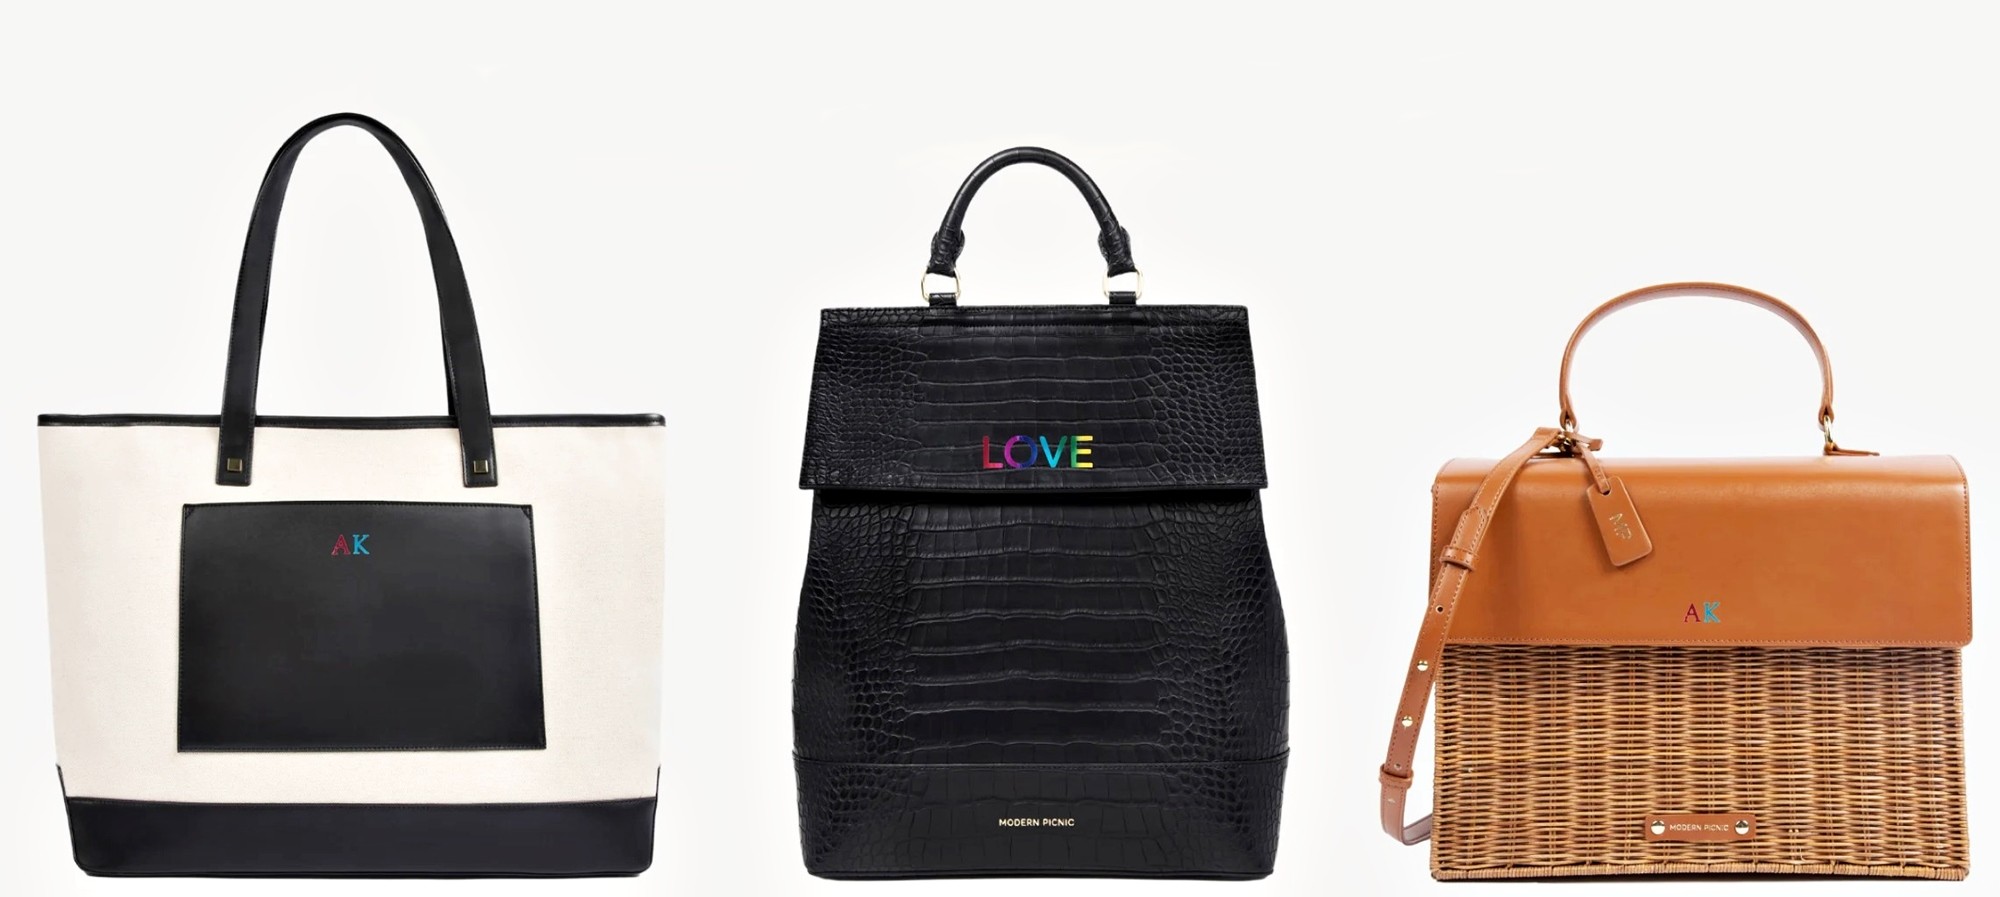 Modern Picnic Pride Collection Bags